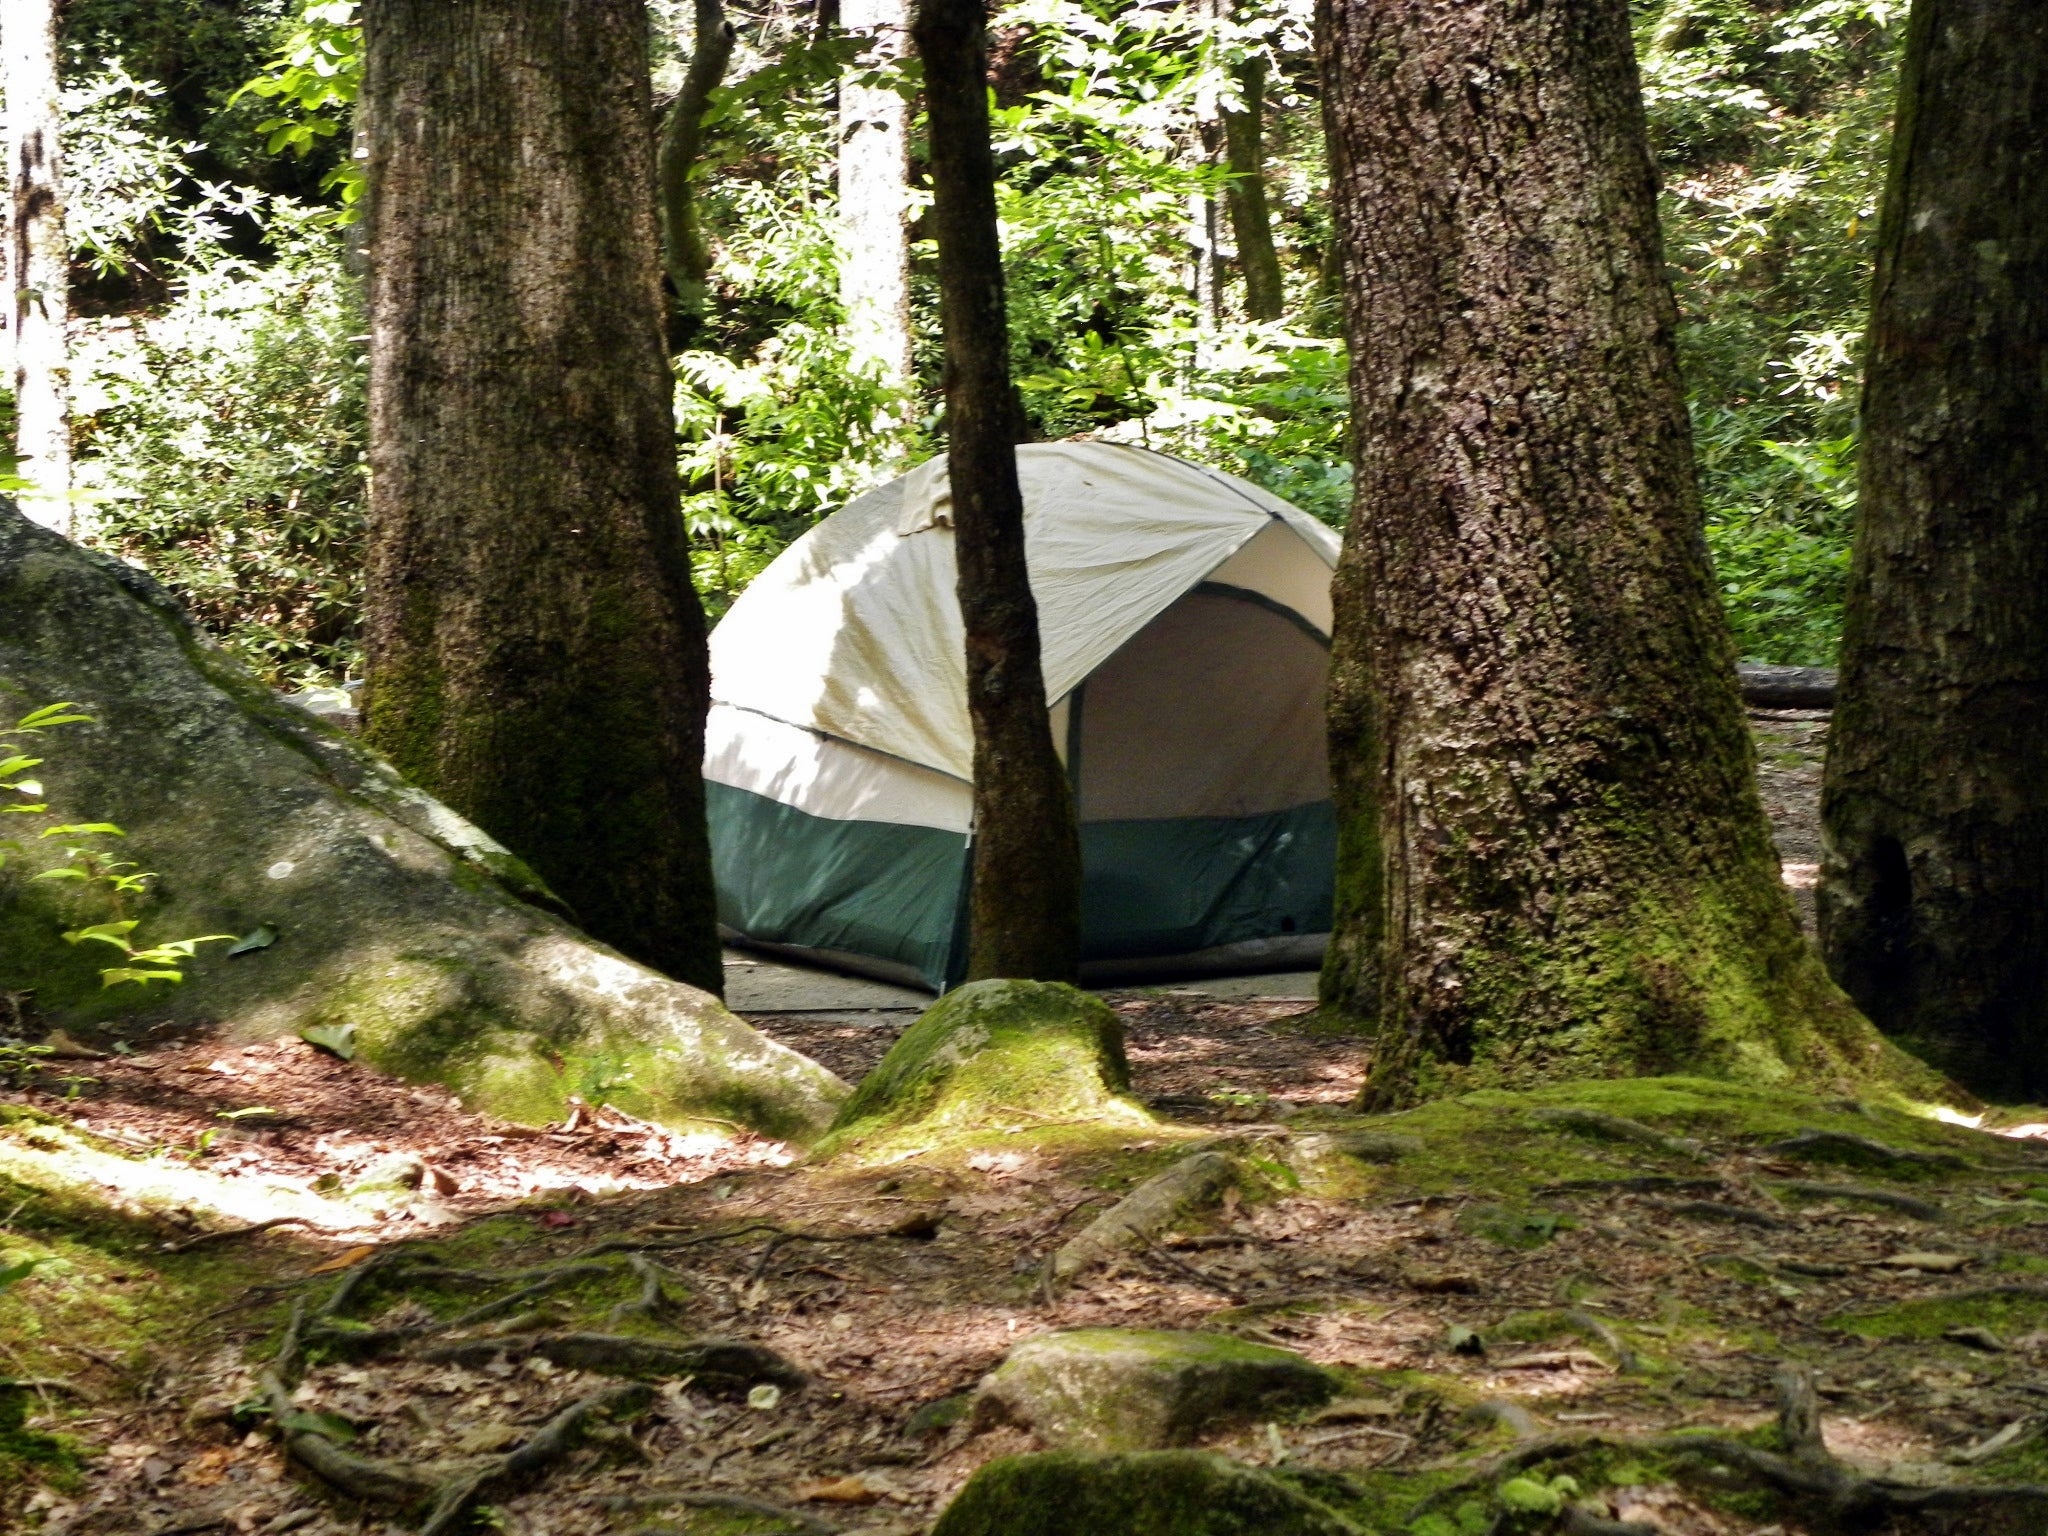 Campsite 8 is just a short walk from the main trail, and it sits beside the creek.